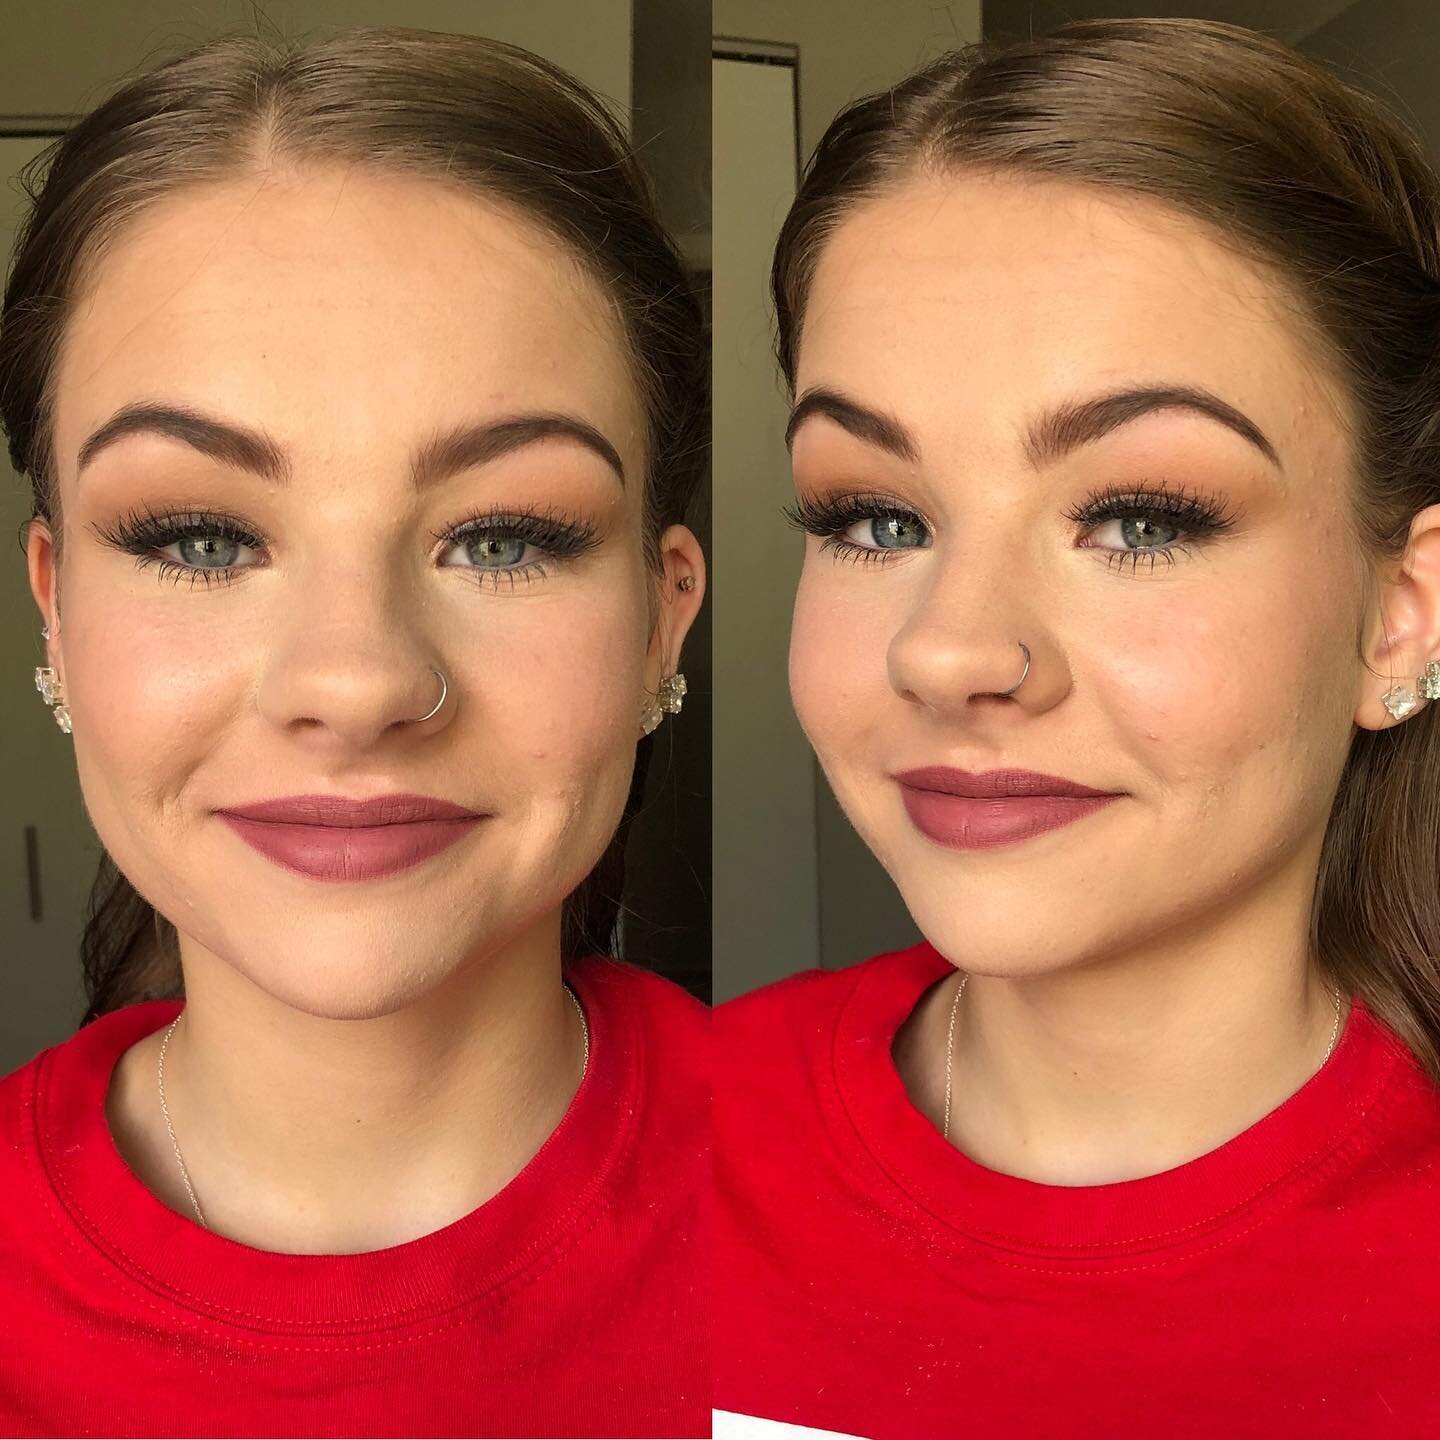 I am so in love with this look I did on a gorgeous young lady !

For Inquiries-
HTTPS://www.makeupbycaitlin.com

https://www.facebook.com/makeupbycaitlinspah/

Instagram : @caitlinguillien_mua 

PRODUCTS USED
PUR 4 in 1 powder, visionary palette, and